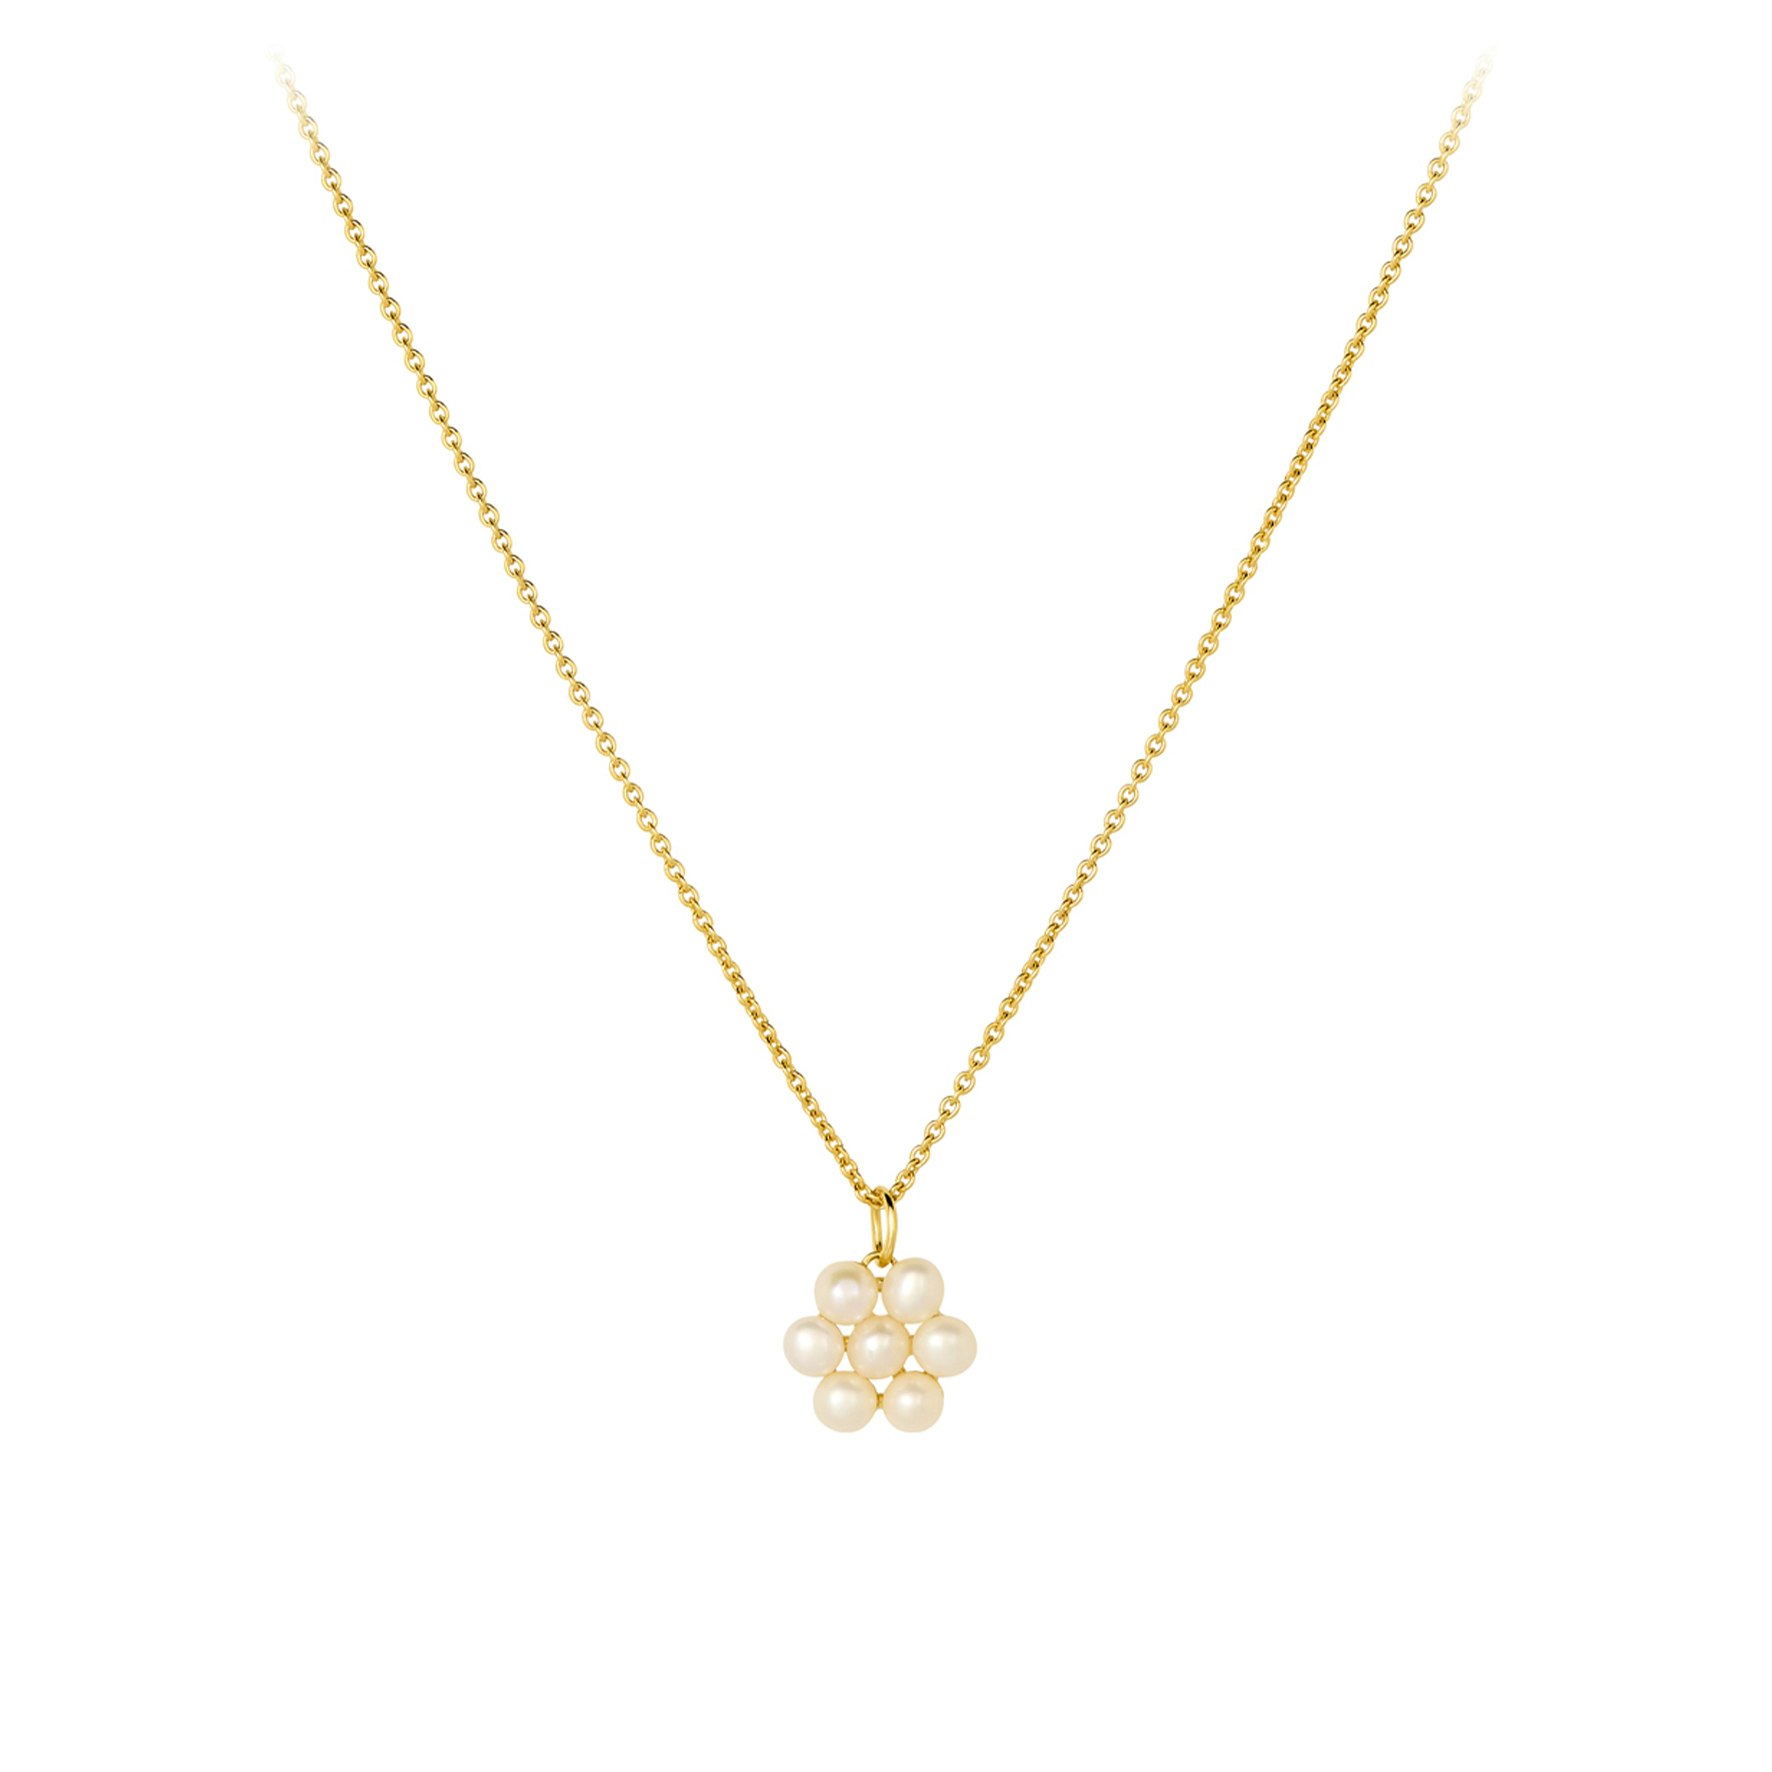 Ocean Bloom Necklace from Pernille Corydon in Goldplated Silver Sterling 925